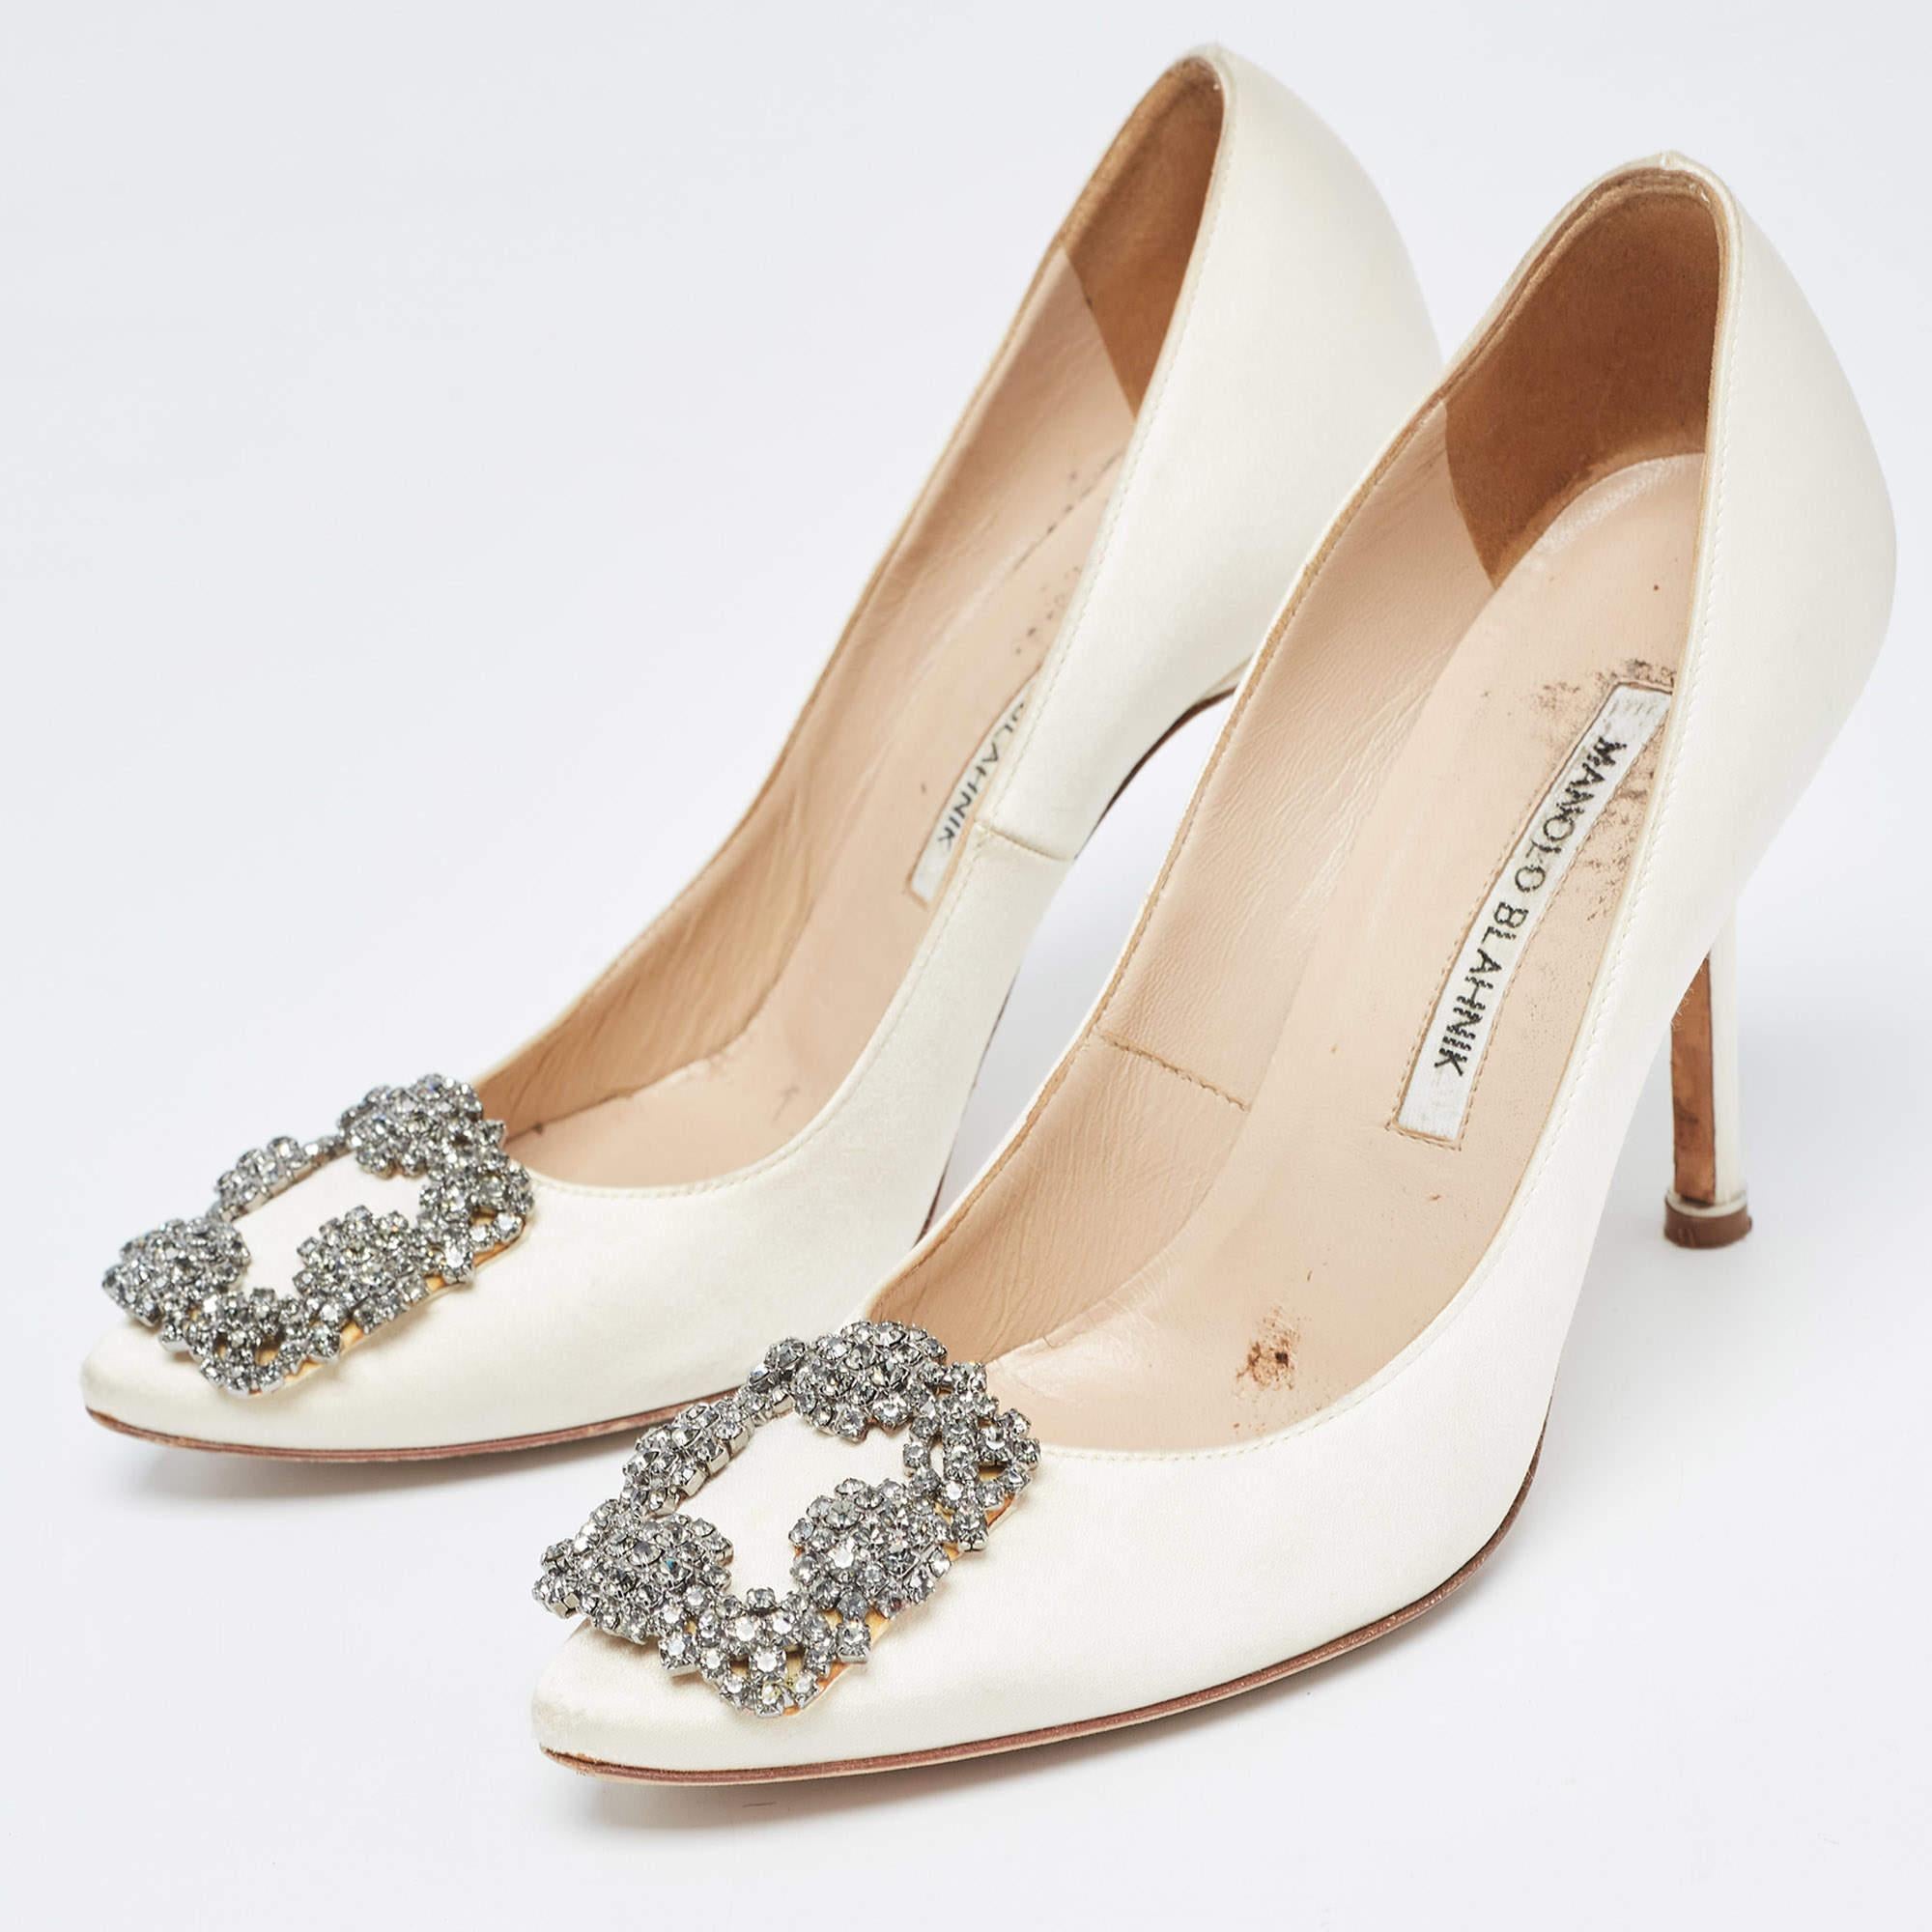 The fashion house’s tradition of excellence, coupled with modern design sensibilities, works to make these Manolo Blahnik pumps a fabulous choice. They'll help you deliver a chic look with ease.

